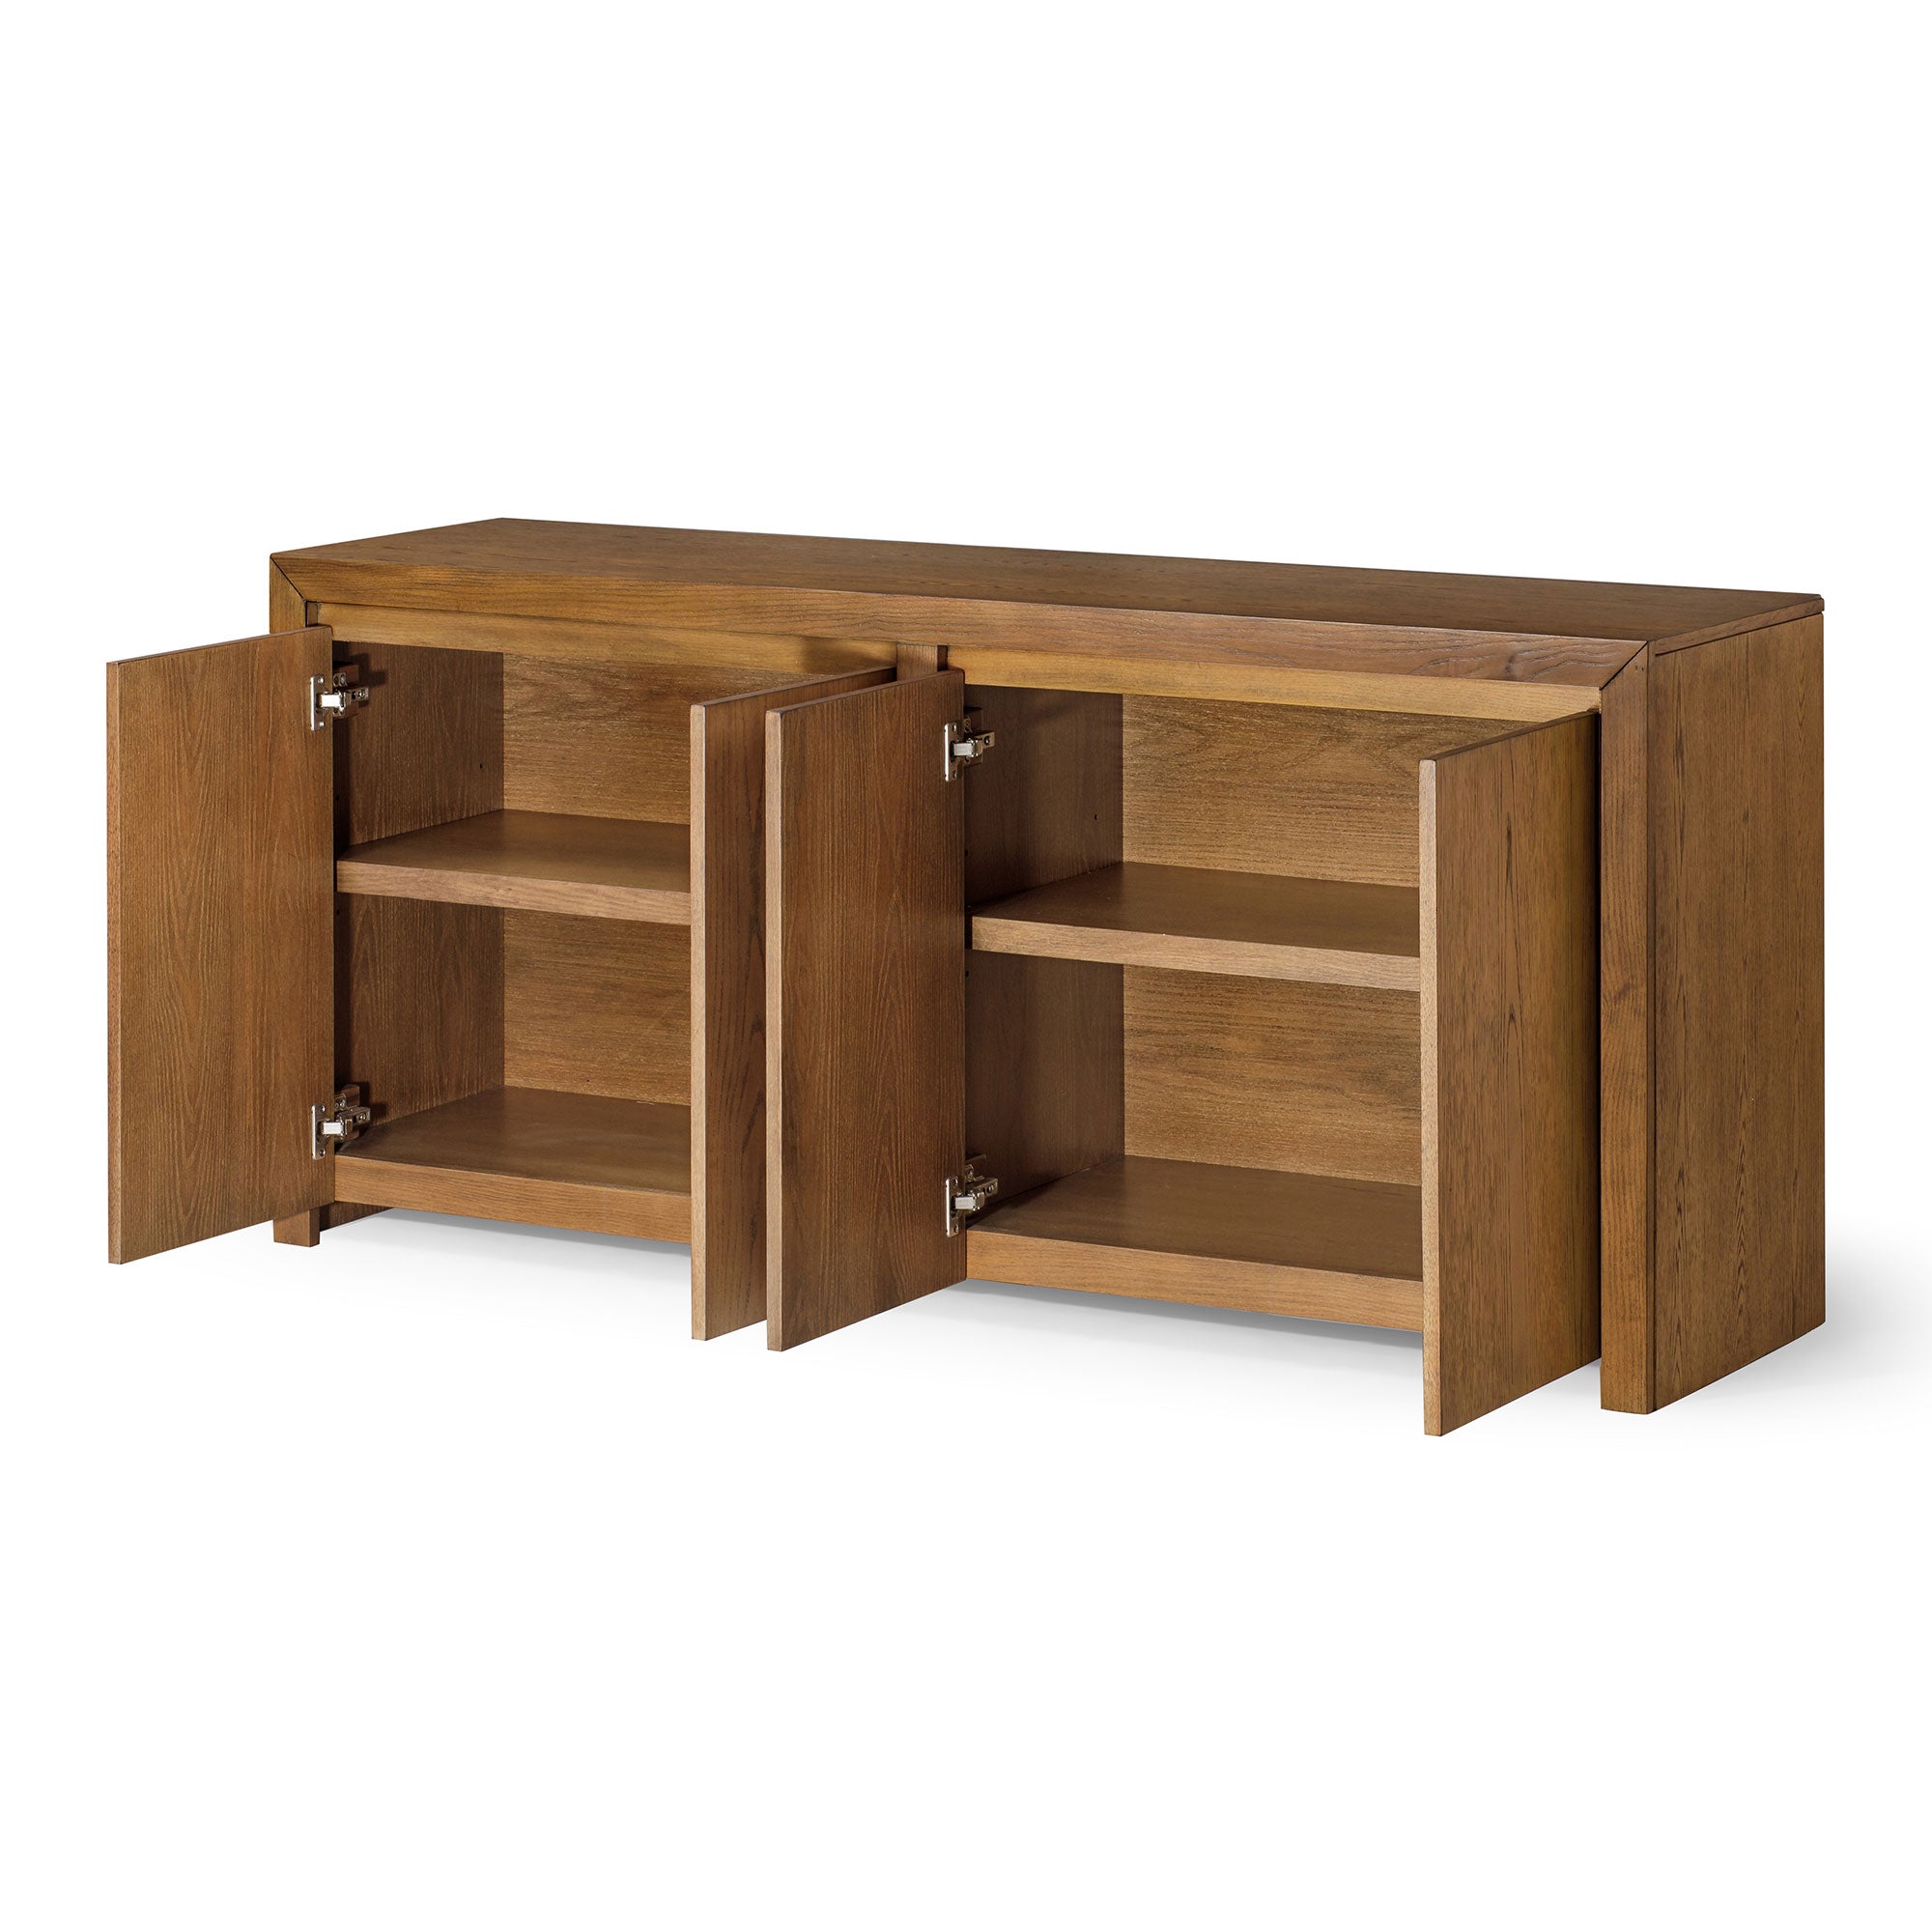 Iris Contemporary Wooden Sideboard in Refined Brown Finish in Cabinets by Maven Lane